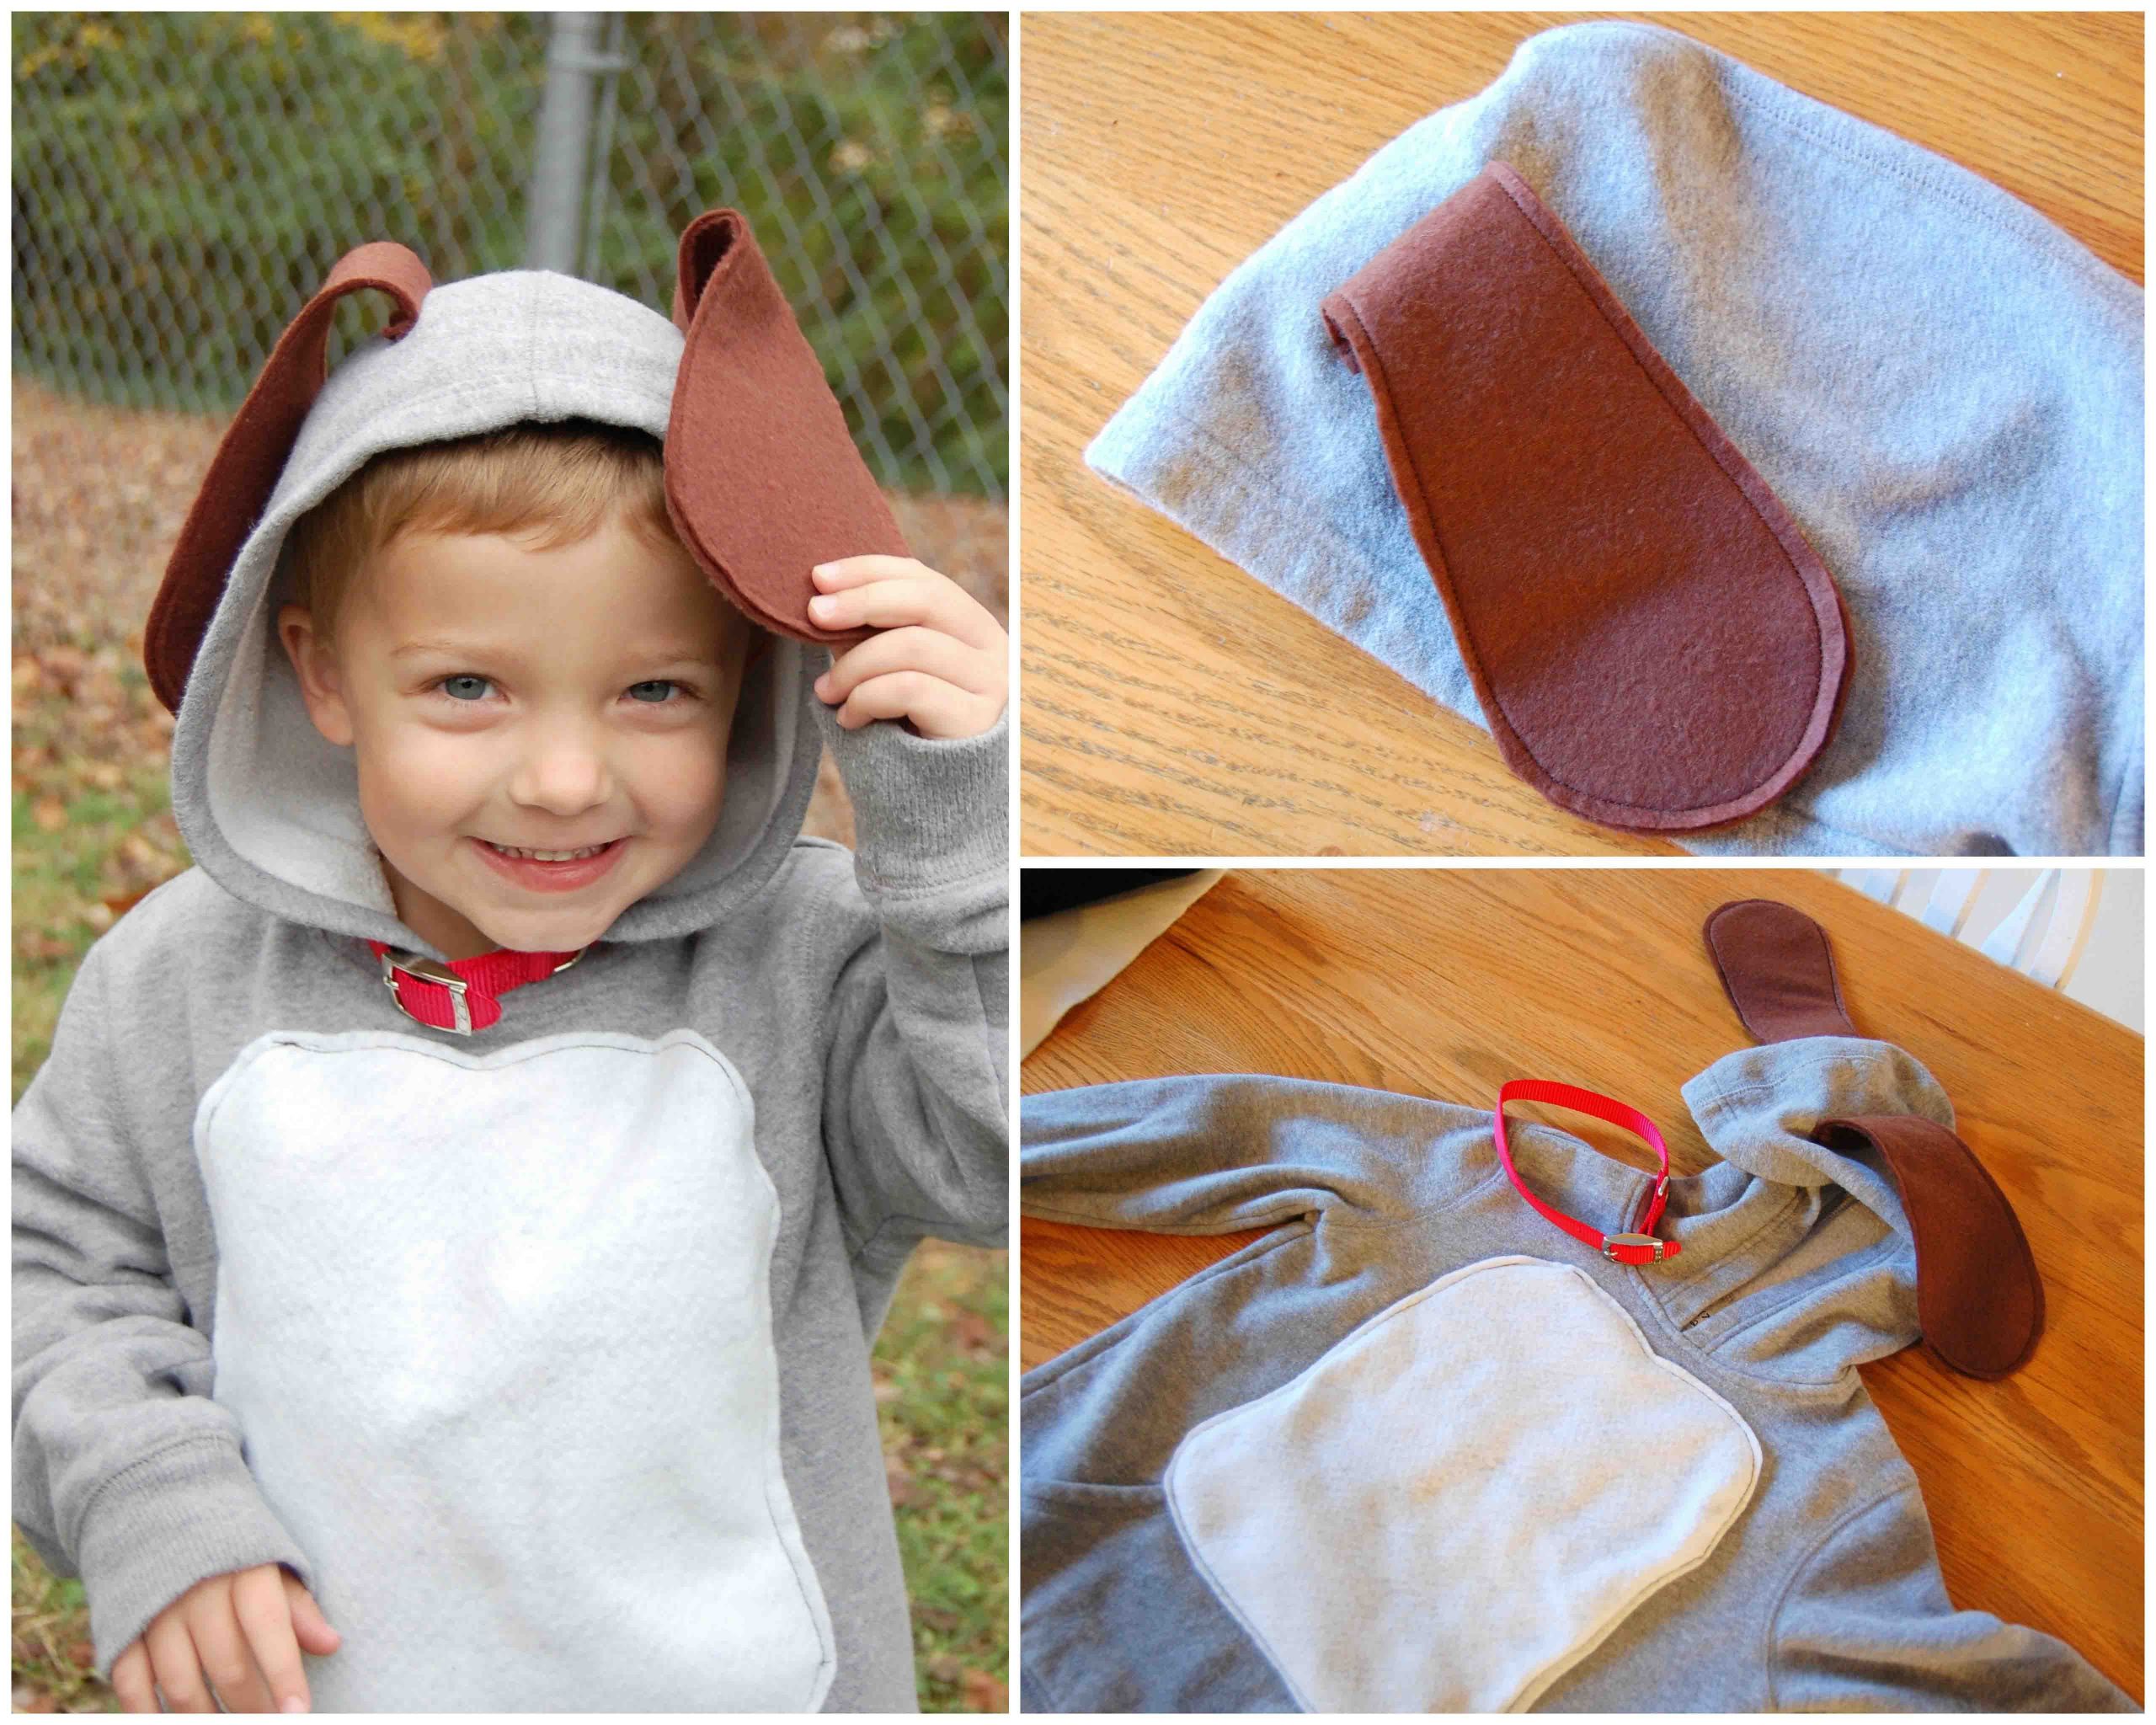 DIY Dog Costume For Kids
 [Pinning my own because I had trouble finding a homemade